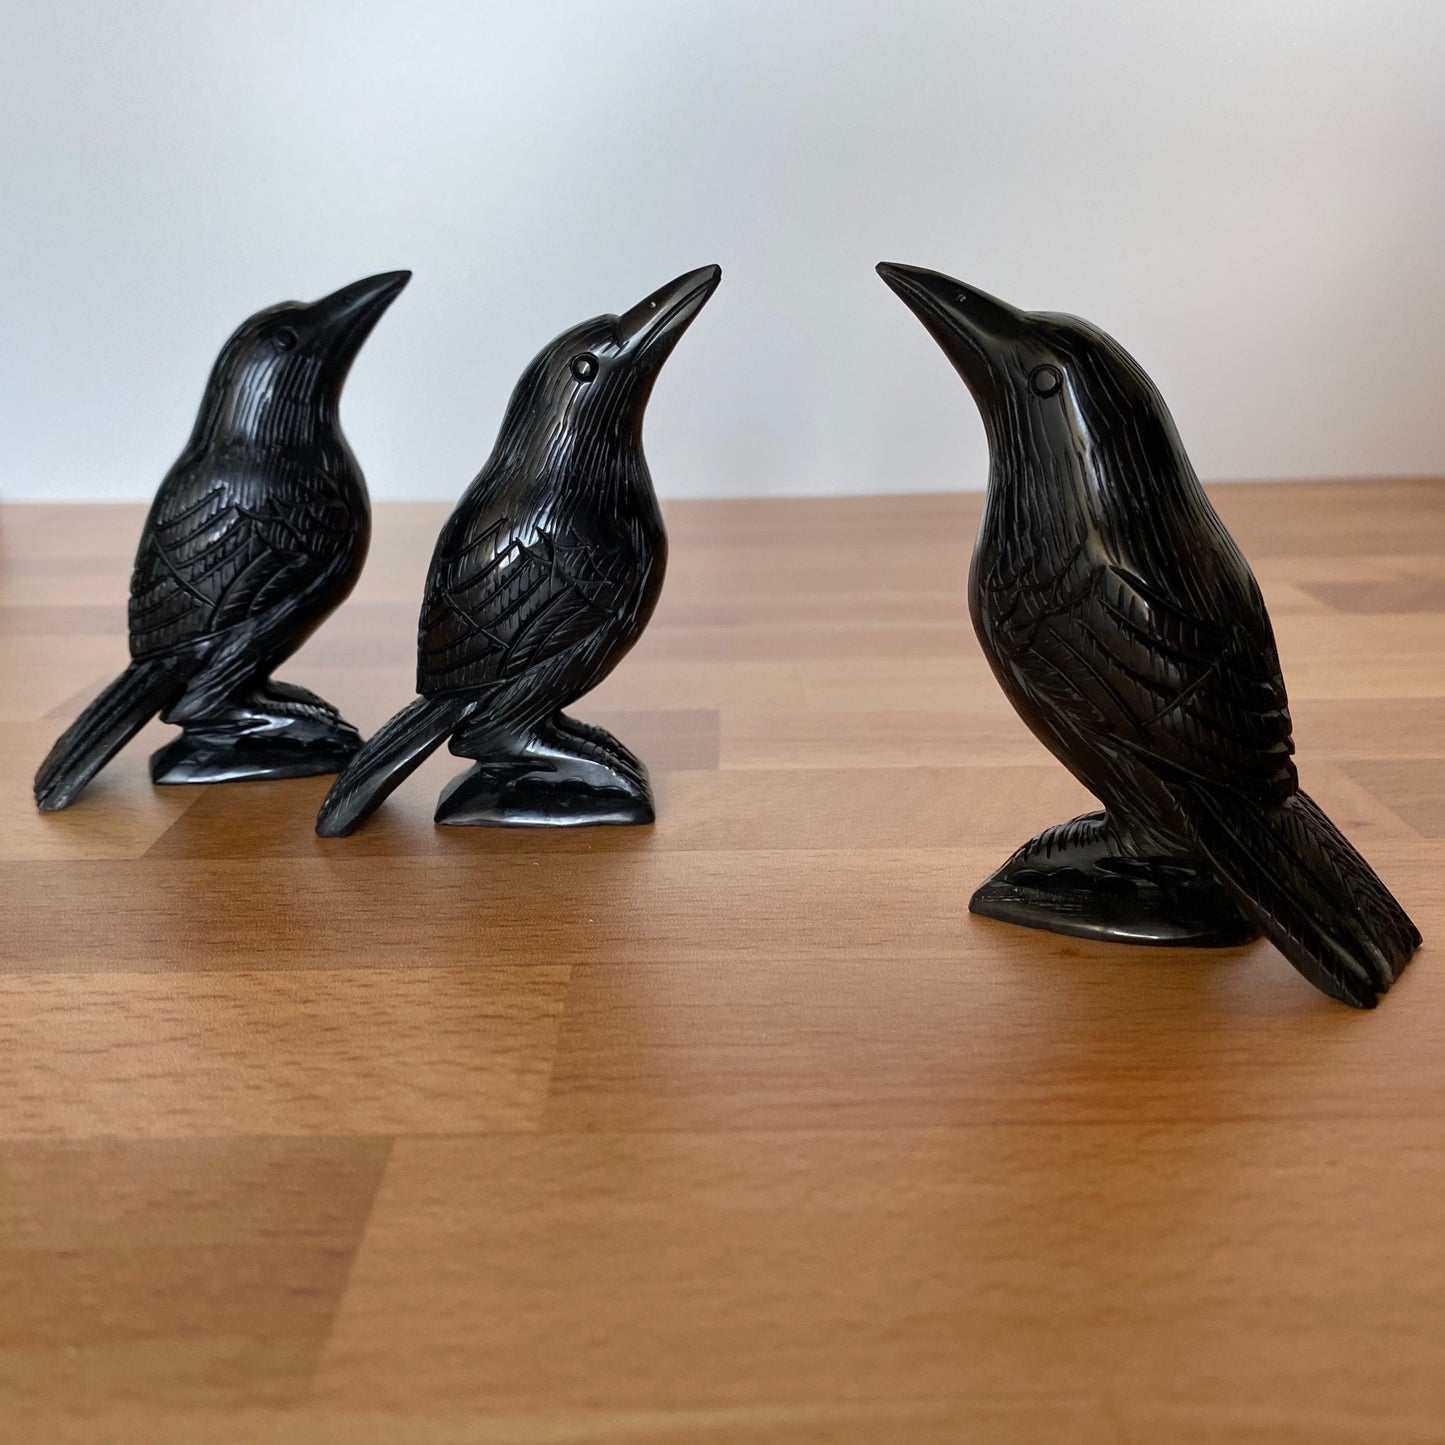 Obsidian Crow Raven Carving